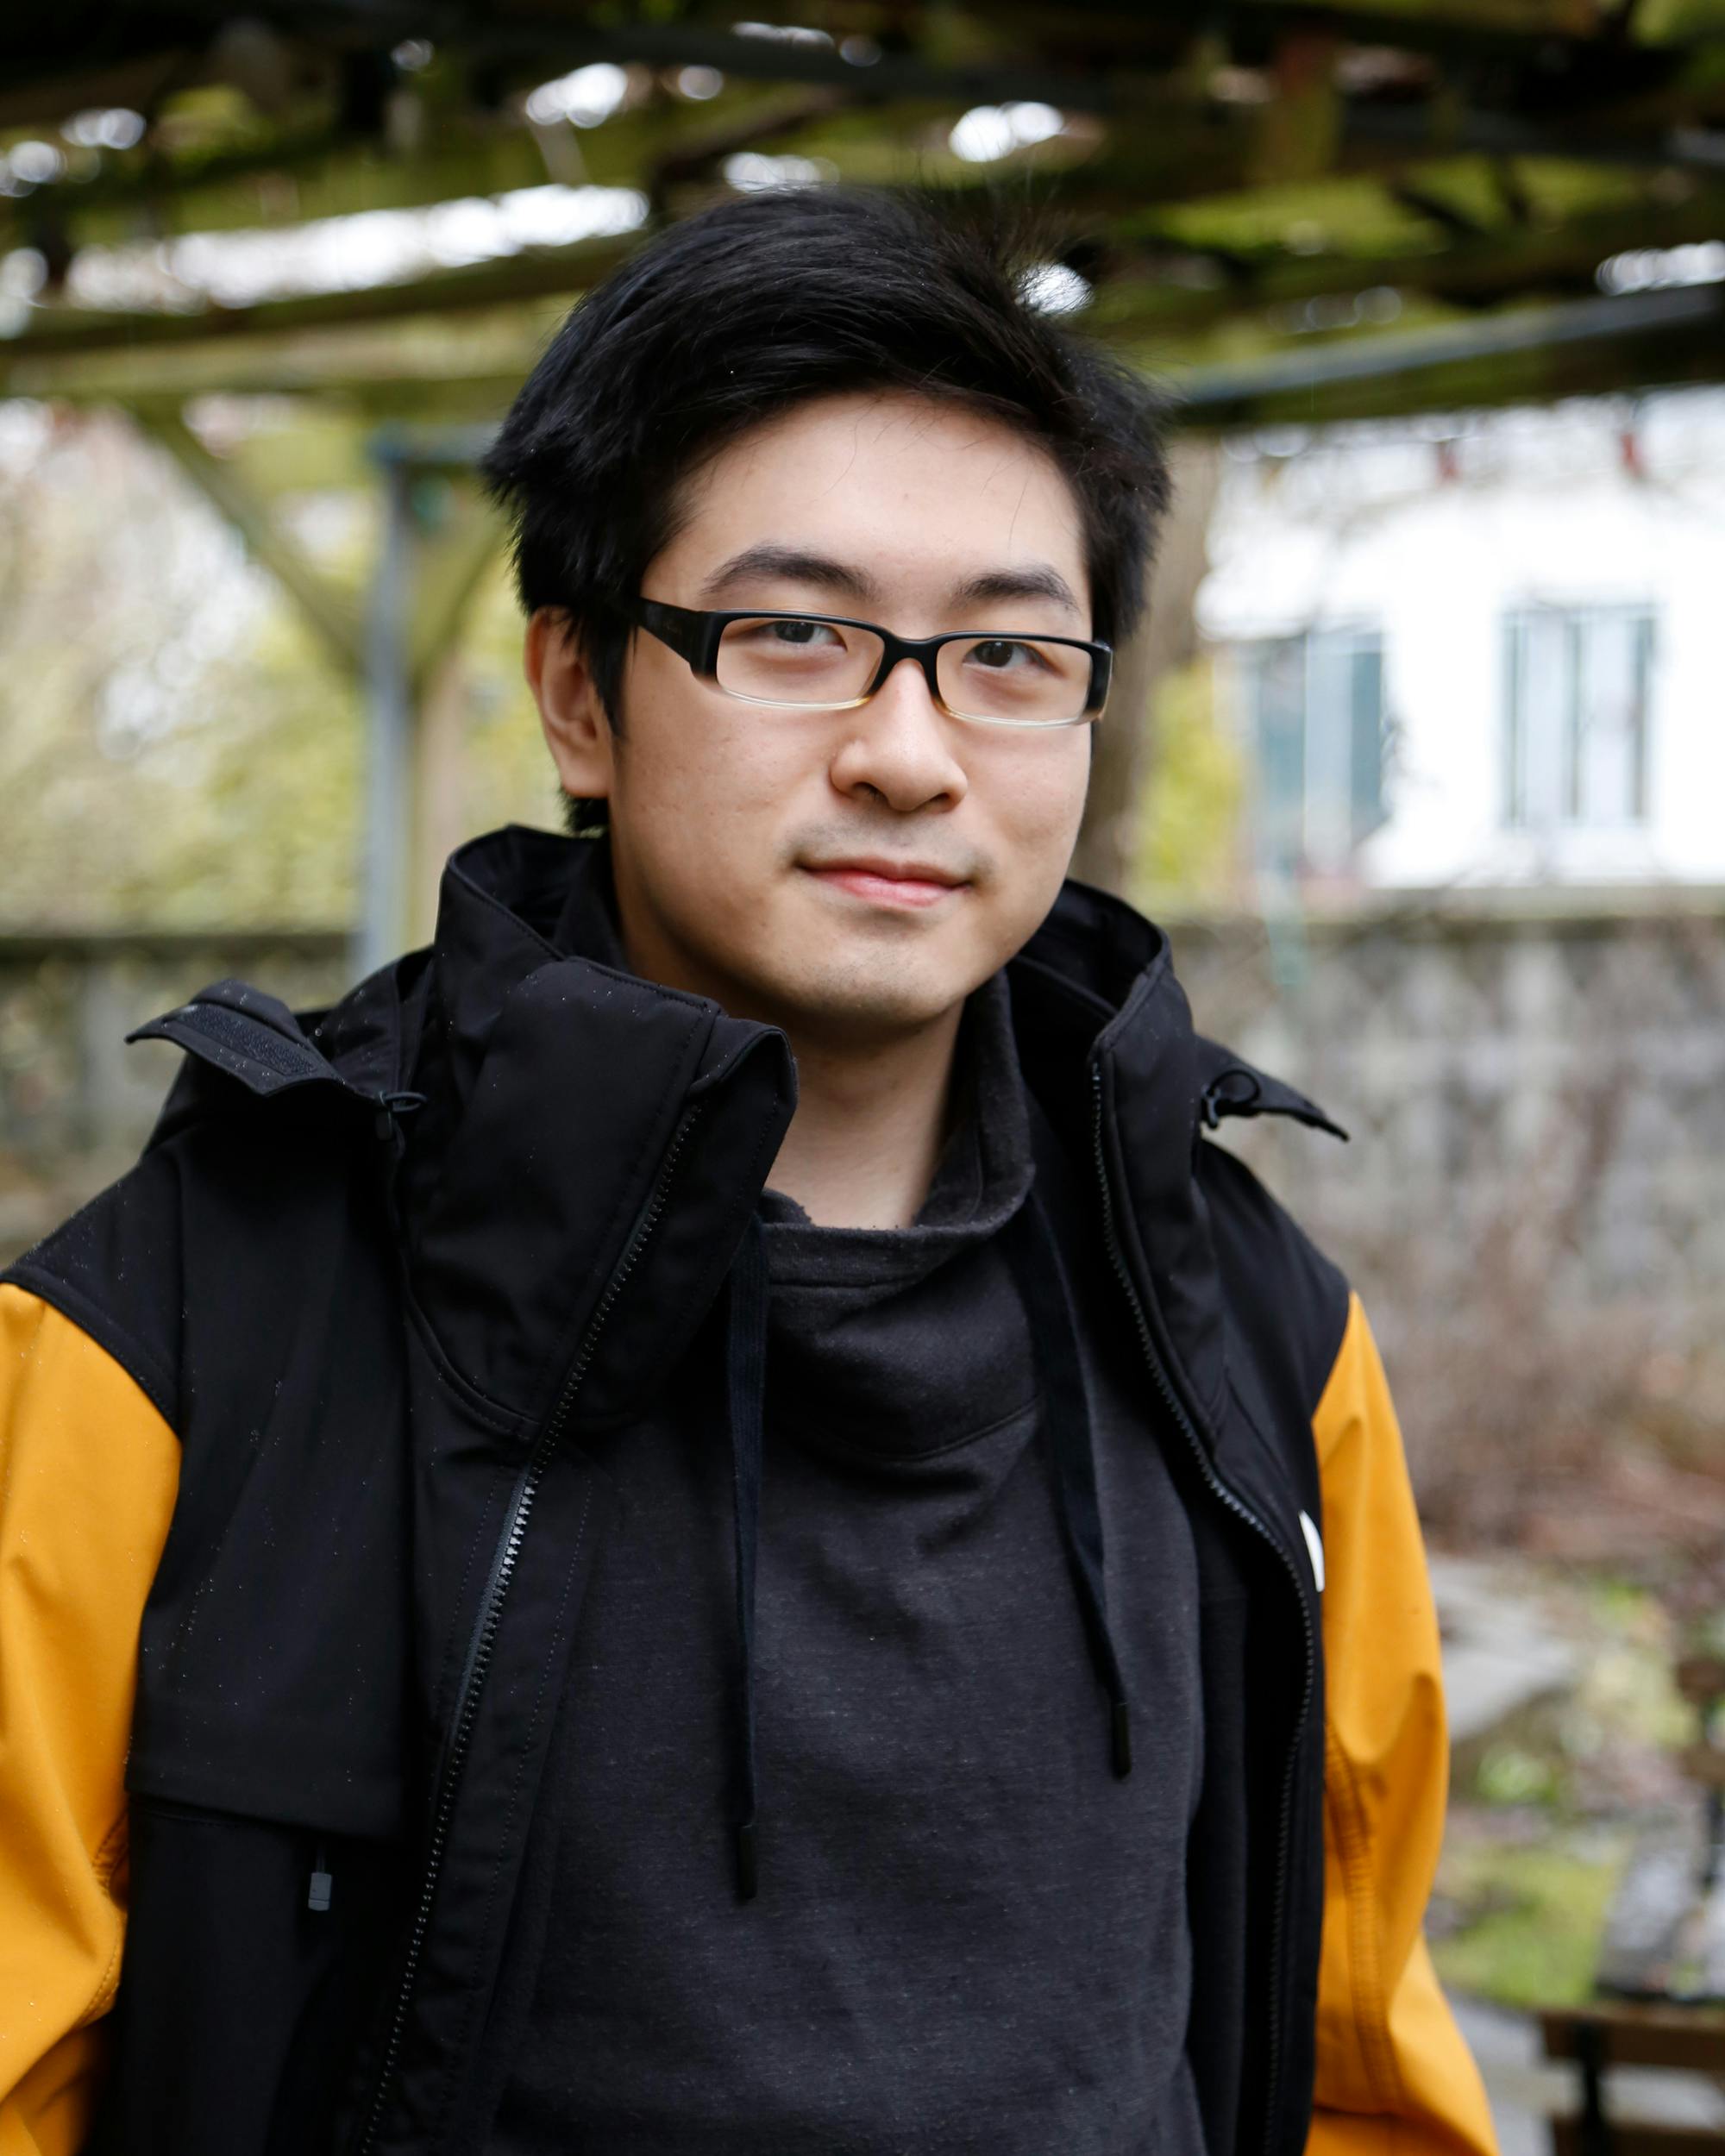 A photo of Silas Ng. He is wearing glasses and a black raincoat with yellow sleeves.